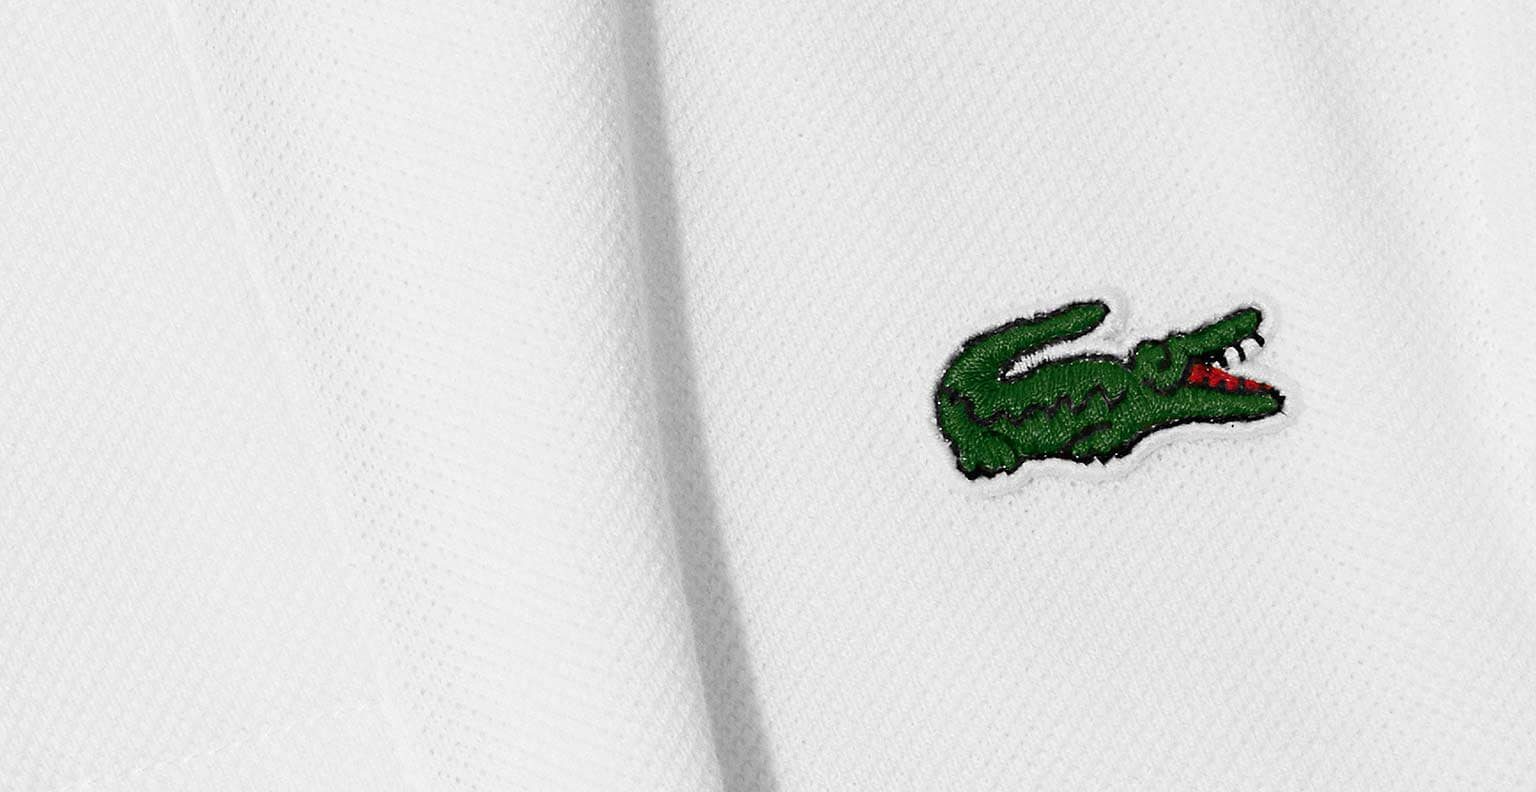 LACOSTE: Digital transformation by data appropriation